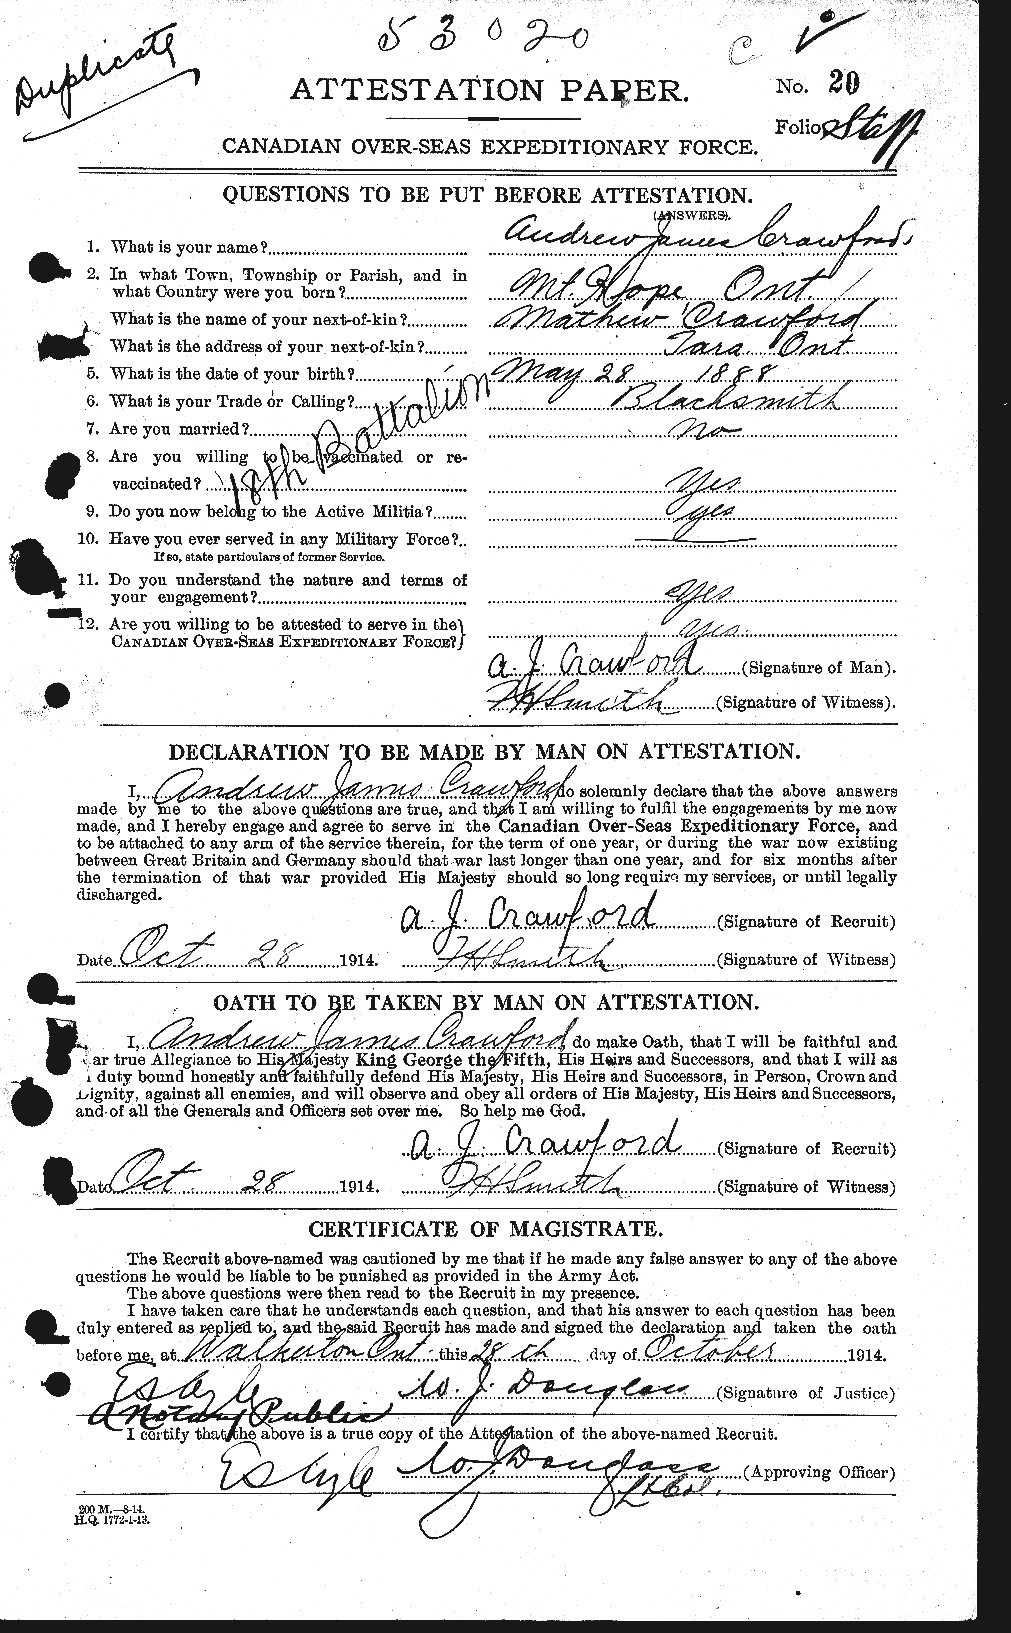 Personnel Records of the First World War - CEF 060943a